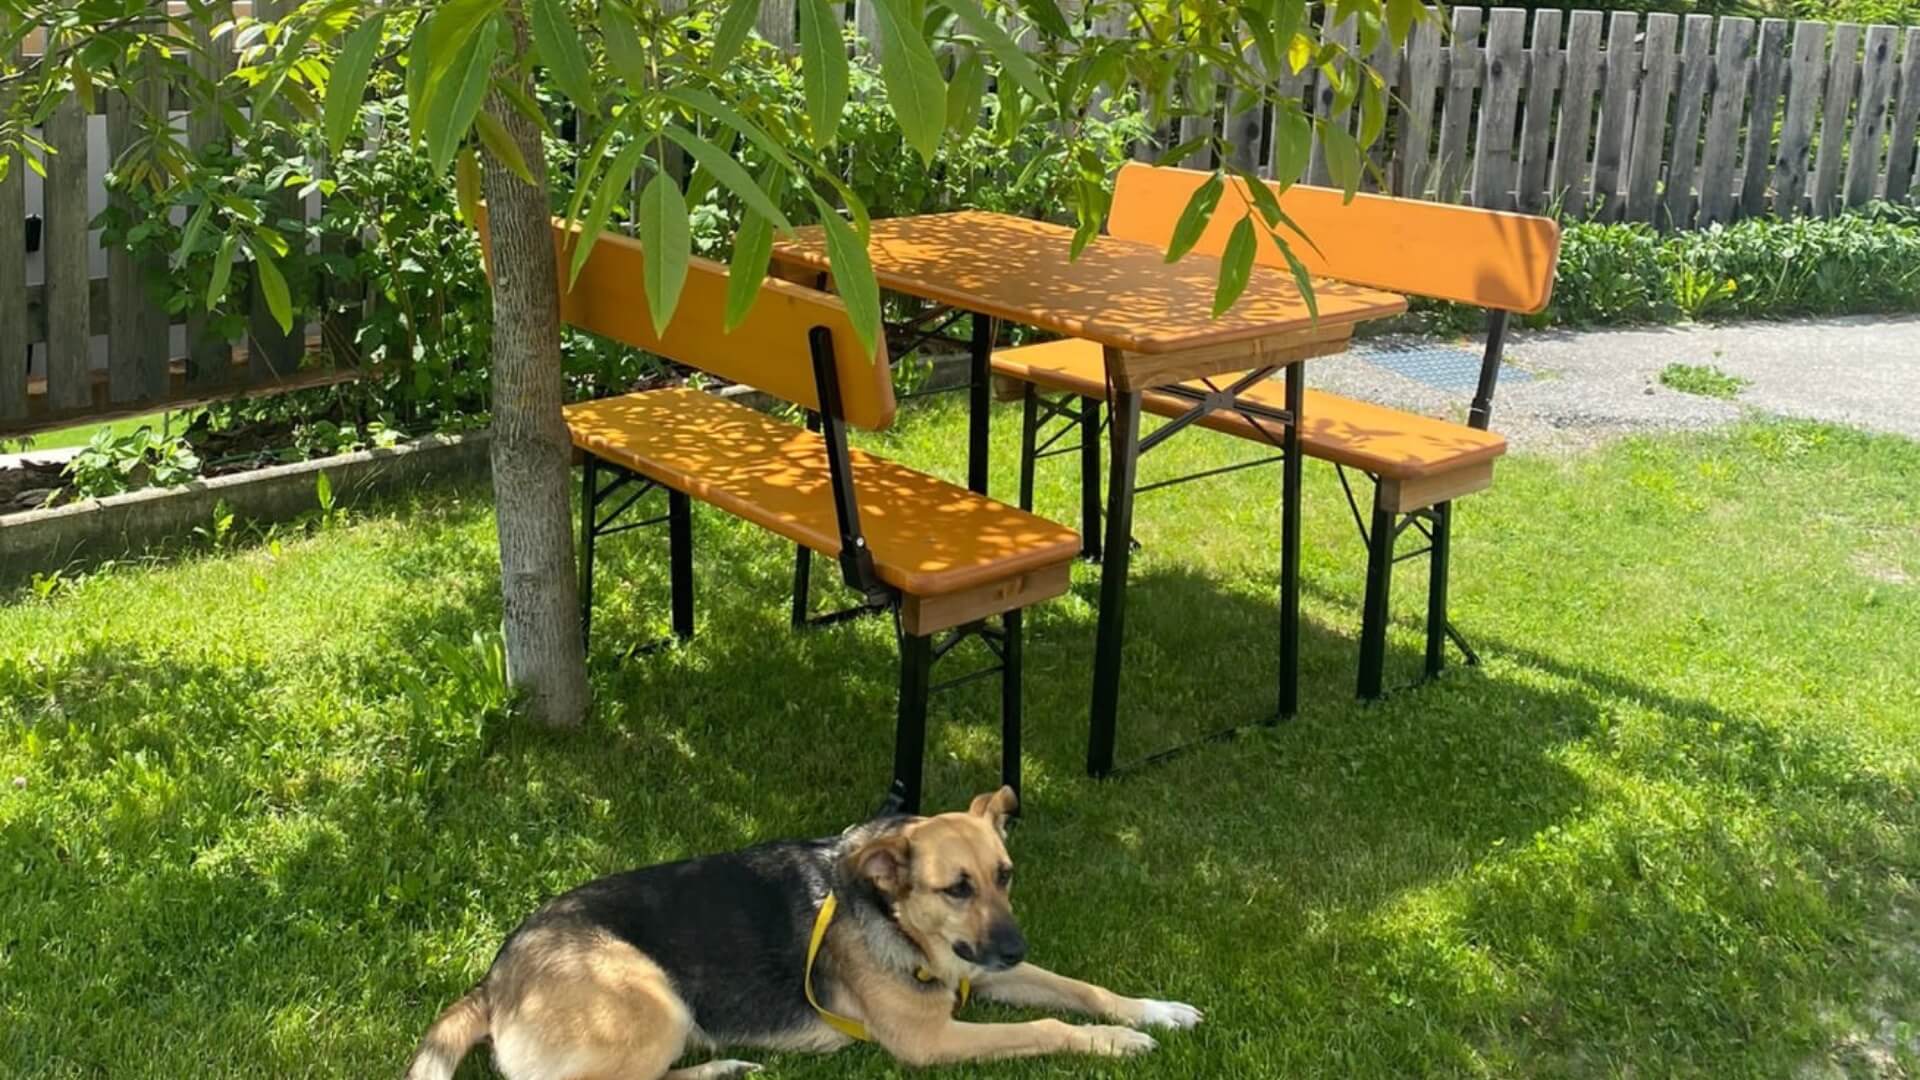 The small beer garden table set was placed in the garden under a tree.